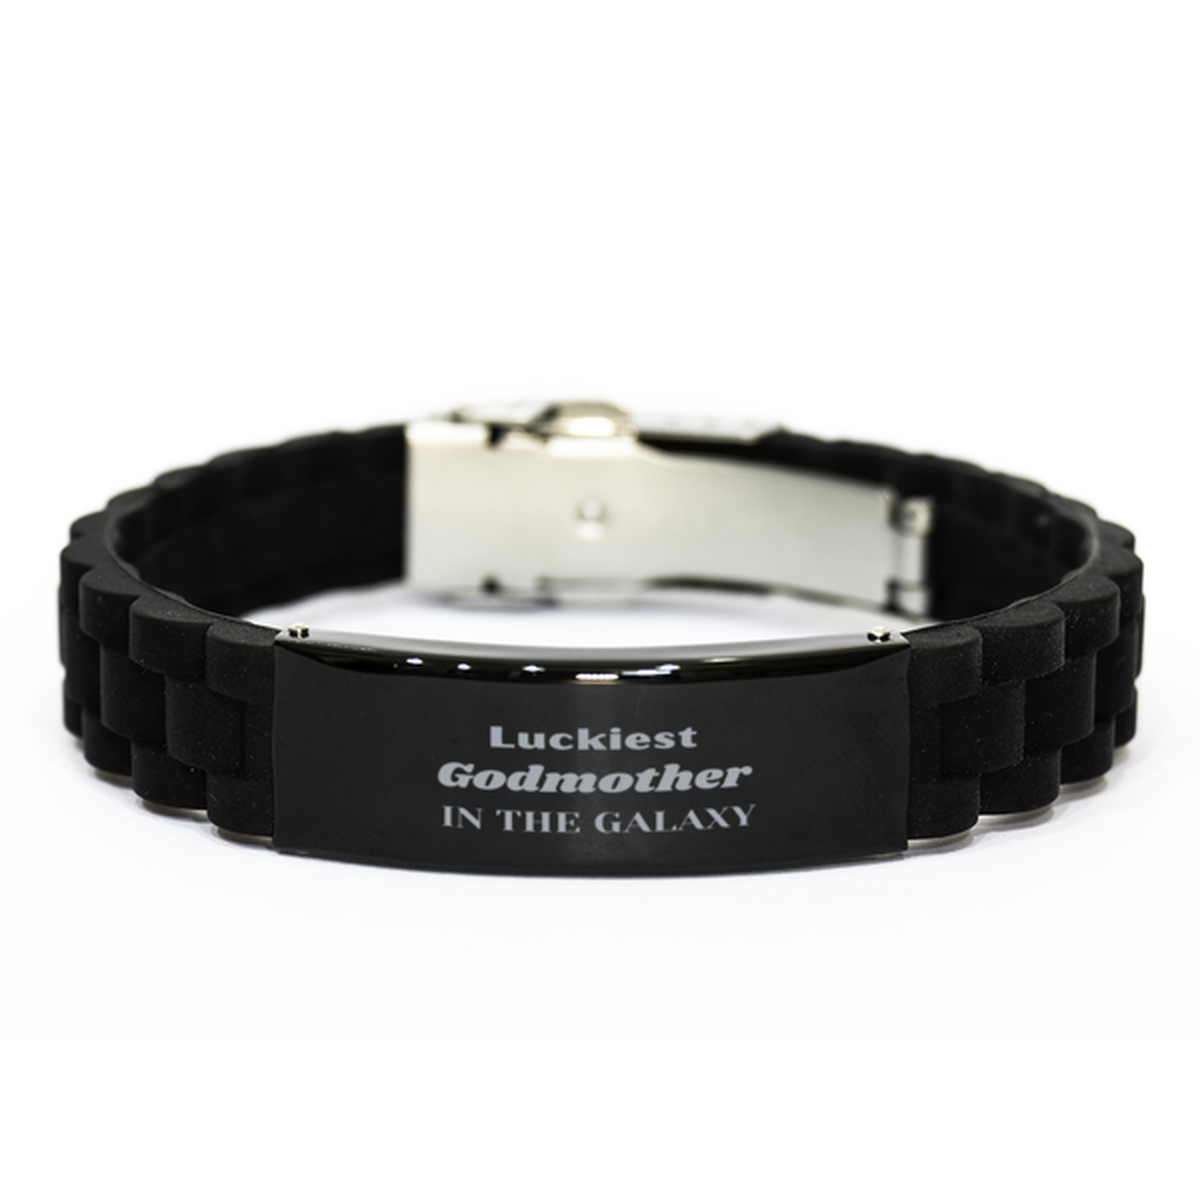 Luckiest Godmother in the Galaxy, To My Godmother Engraved Gifts, Christmas Godmother Black Glidelock Clasp Bracelet Gifts, X-mas Birthday Unique Gifts For Godmother Men Women